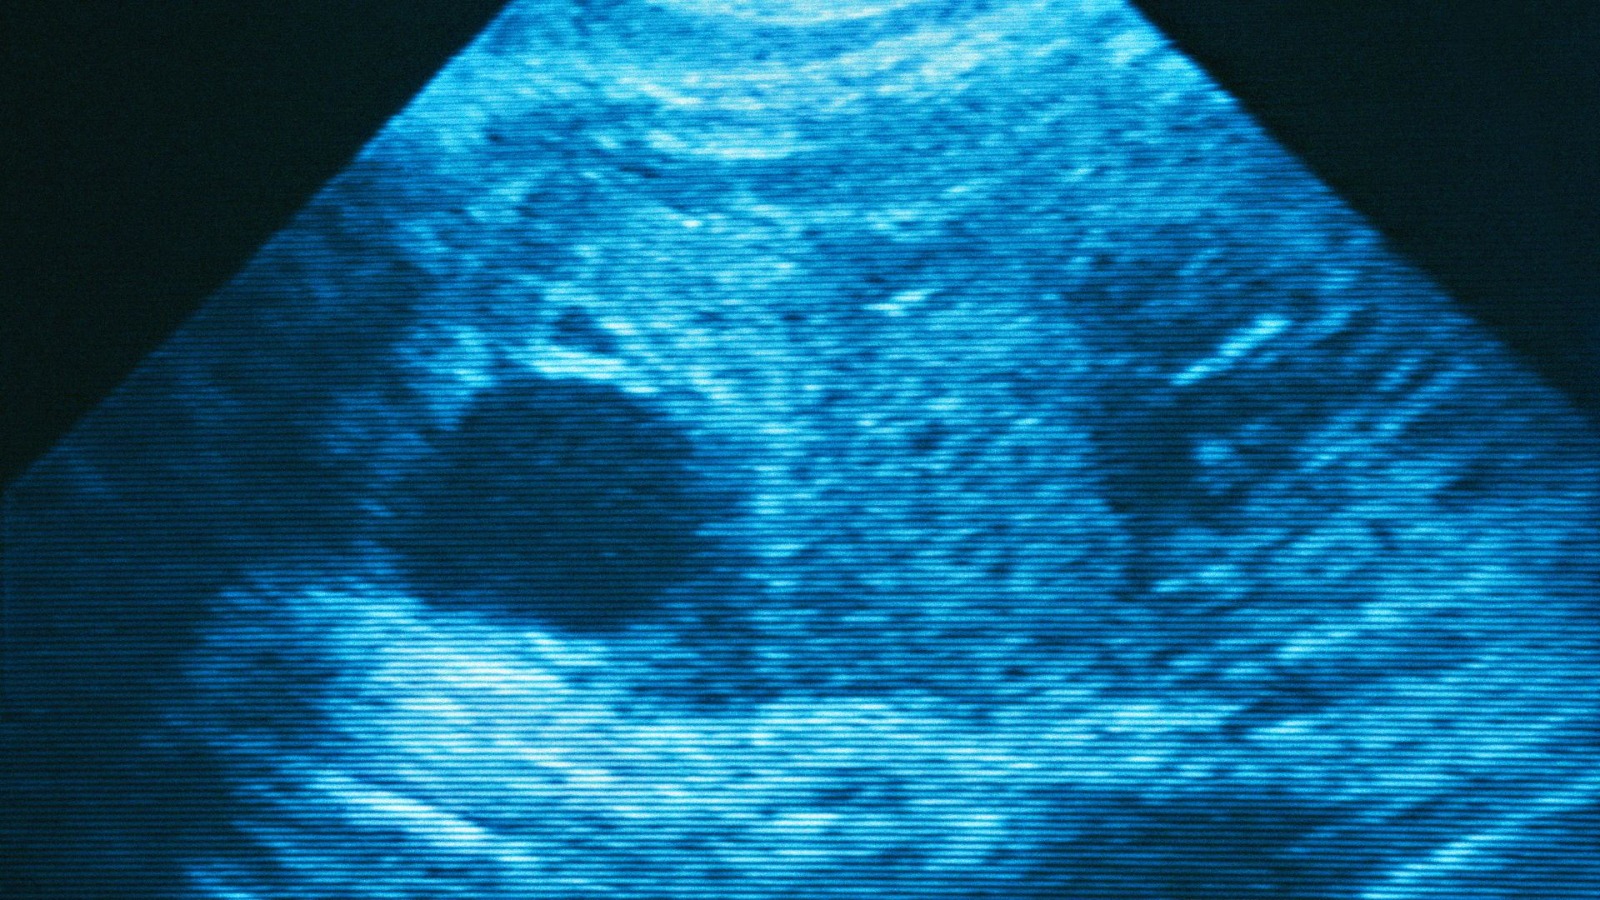 FETAL ANOMALY SCAN